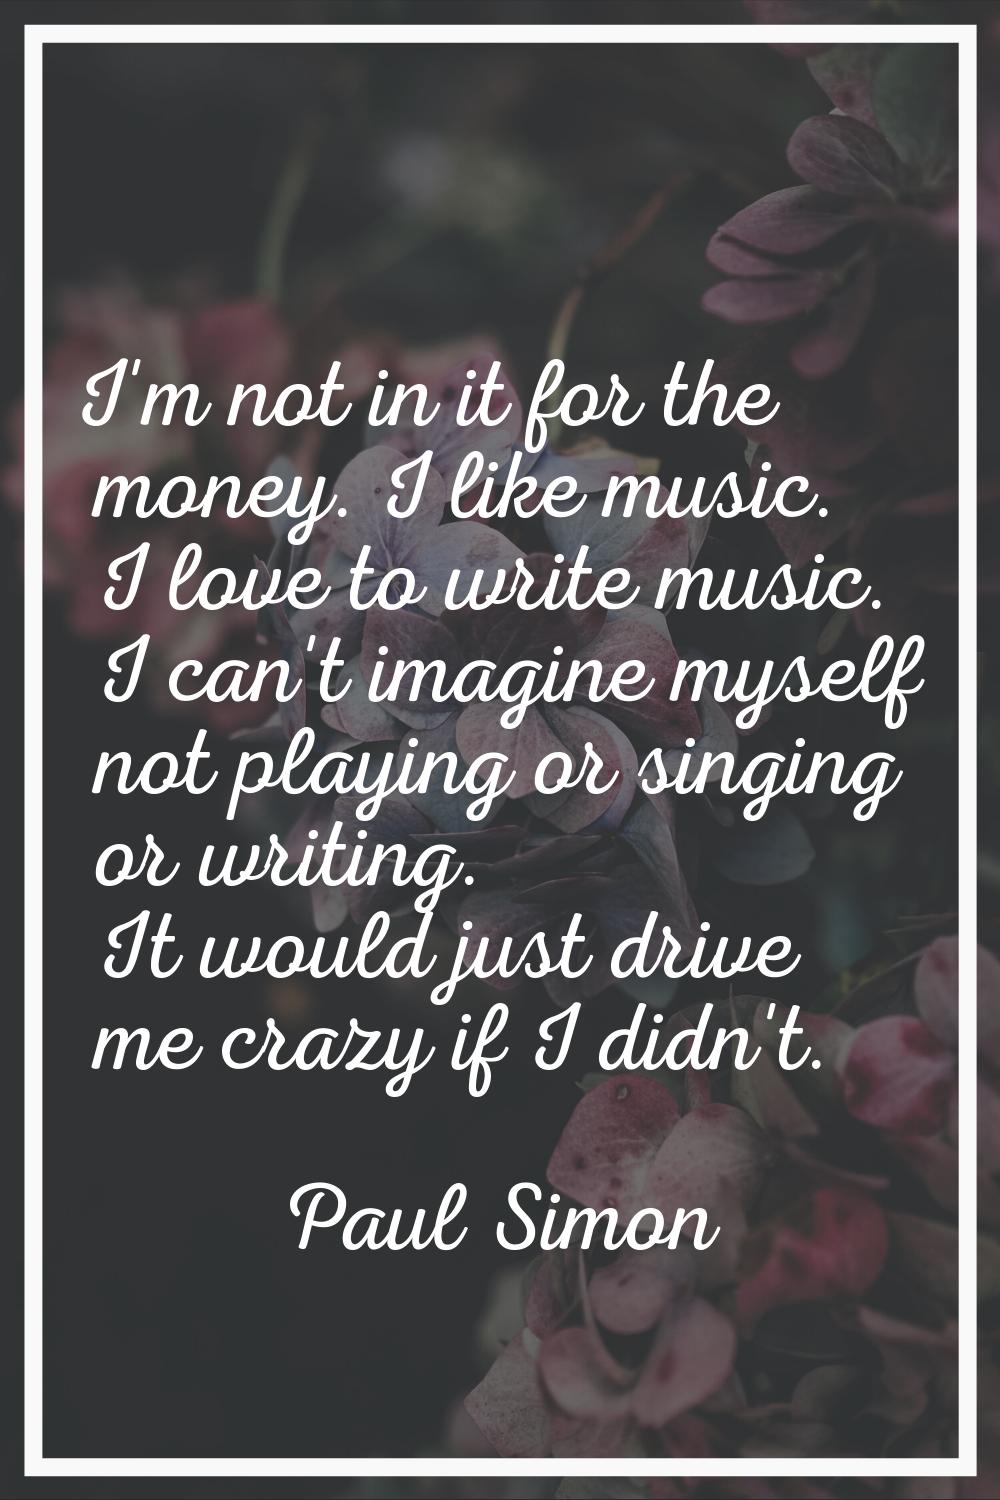 I'm not in it for the money. I like music. I love to write music. I can't imagine myself not playin